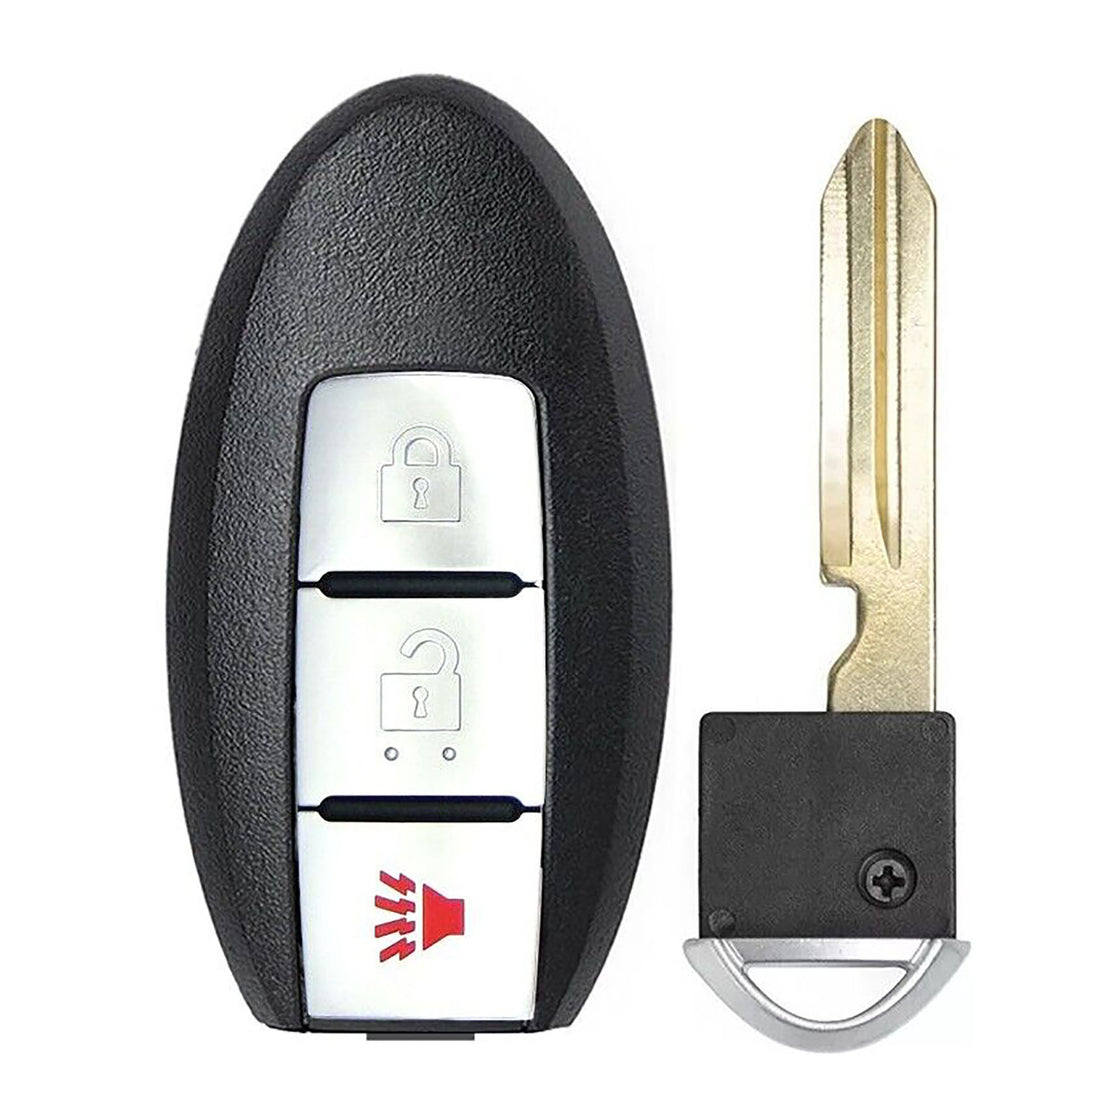 1x New Replacement Proximity Key Fob Compatible with & Fit For Nissan Infiniti Read Description - MPN CWTWBU729-02